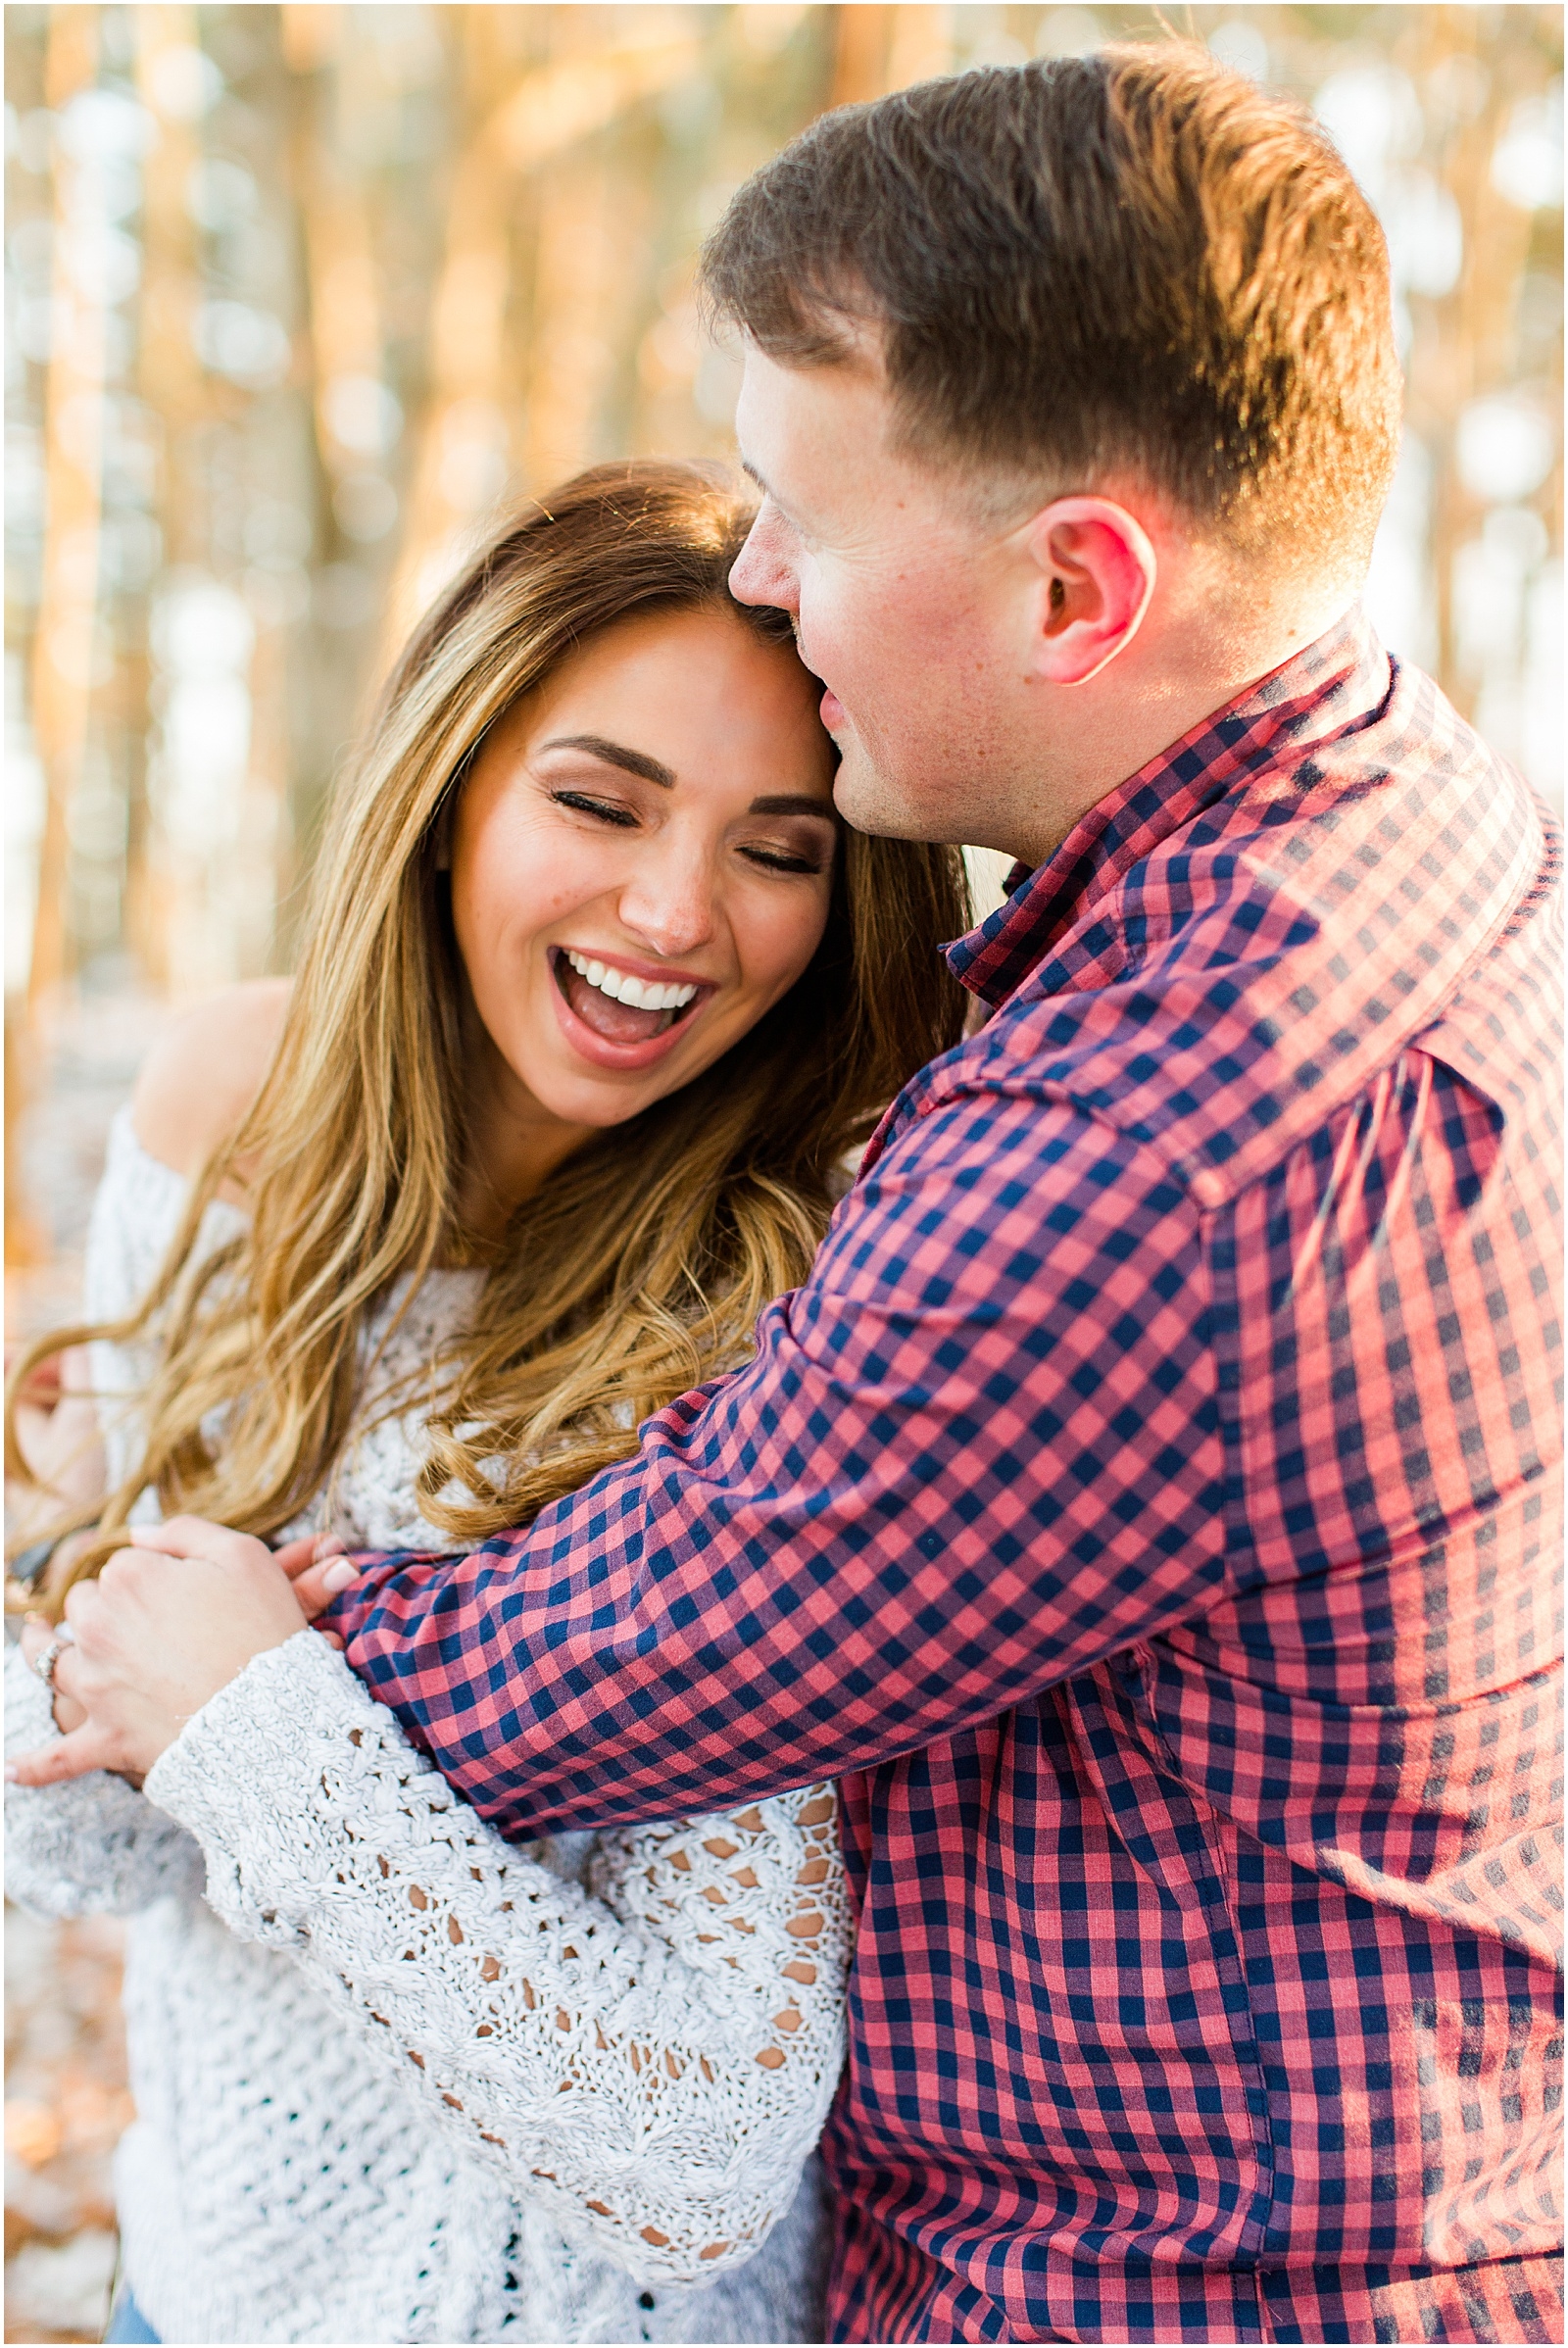 A Sunny Garden of the Gods Engagement Session | Shiloh and Lee | Bret and Brandie Photography040.jpg